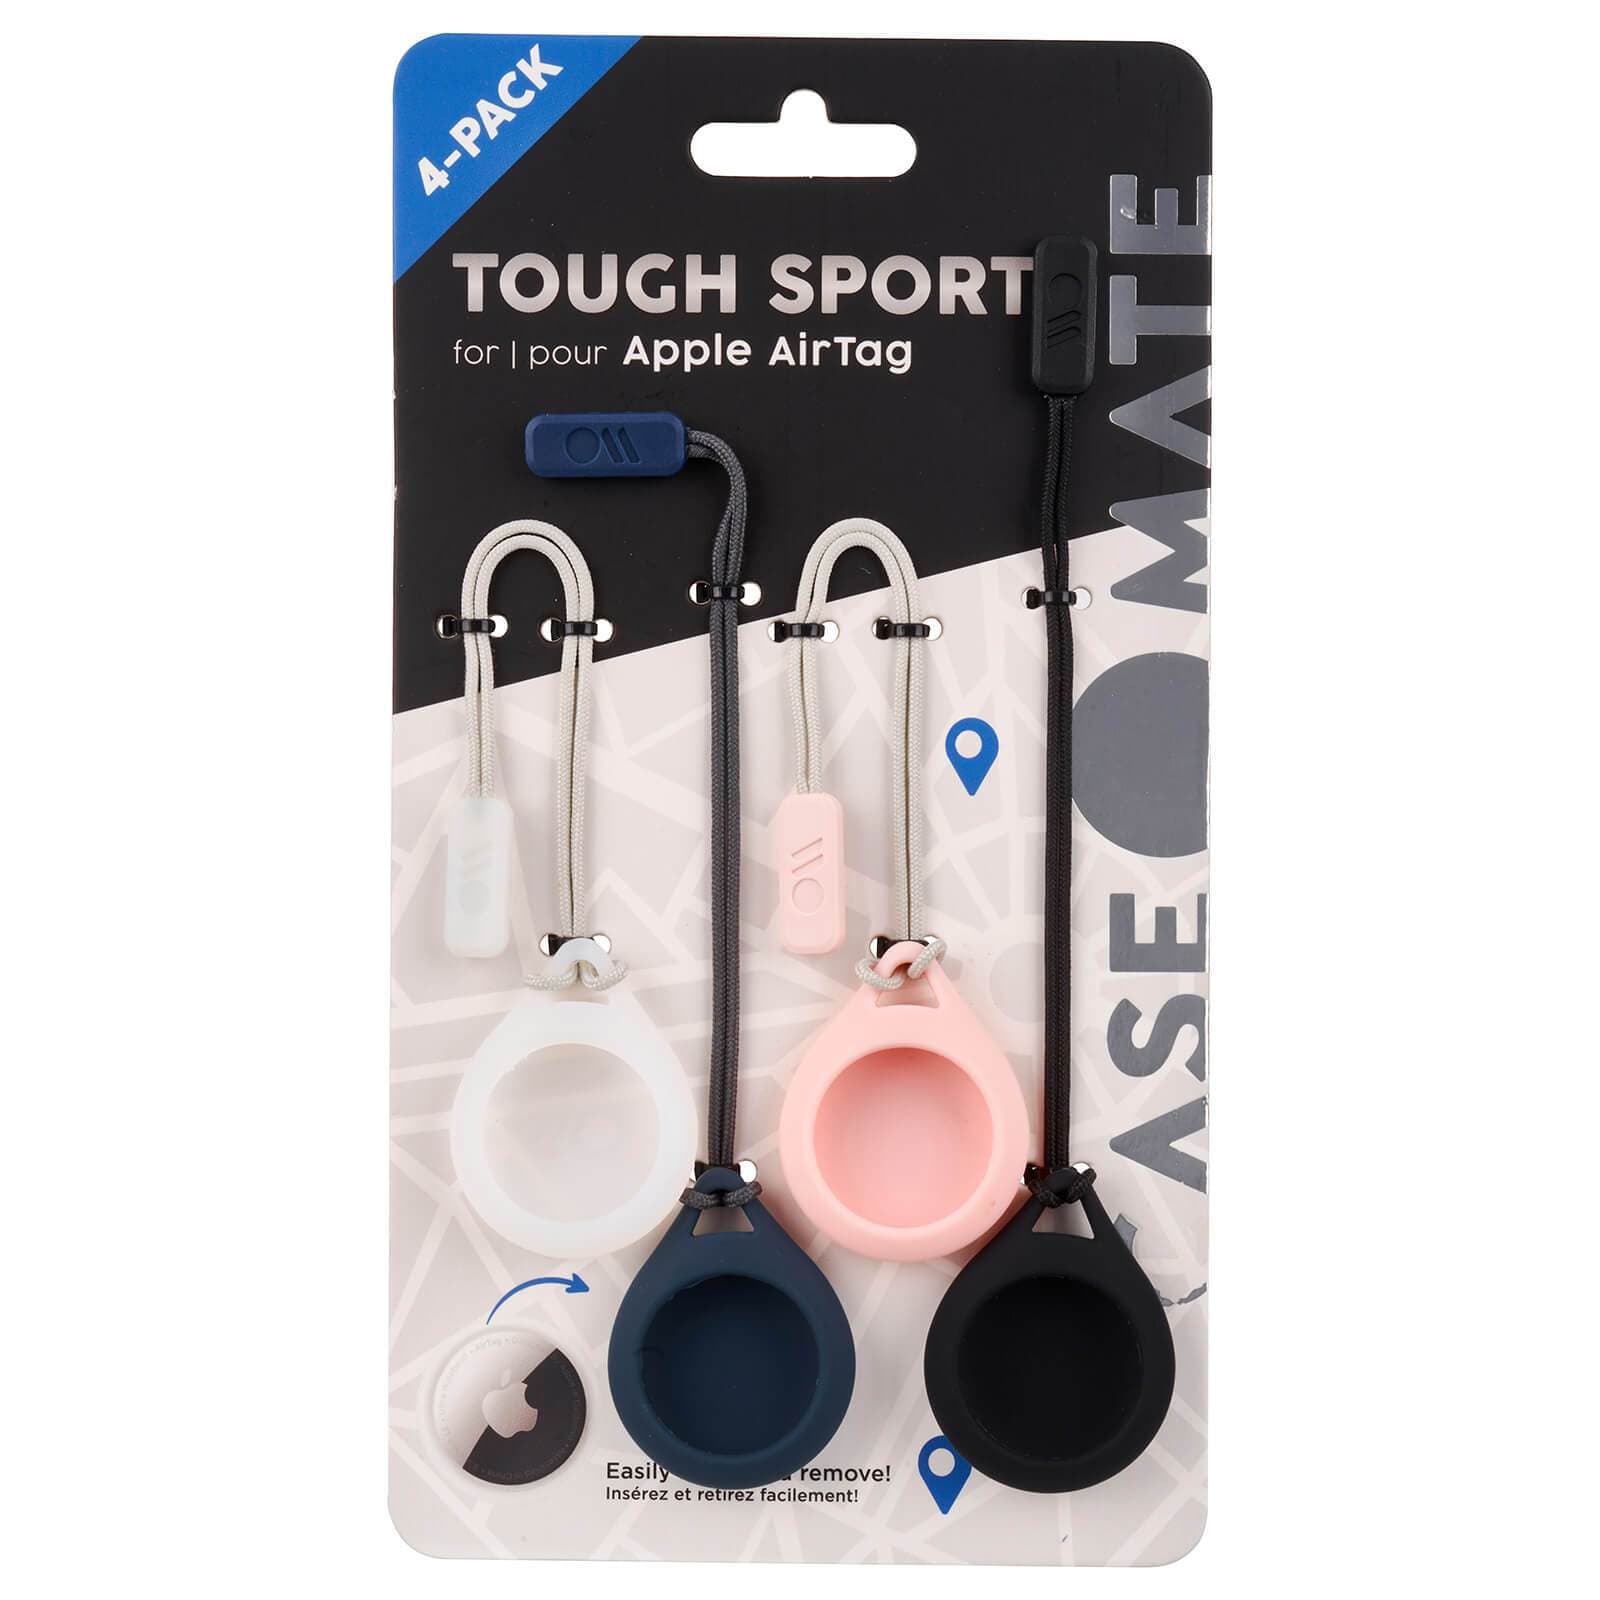 Tough Sport AirTag case 4 pack packaging. color::Clear/Black/Navy/Blush